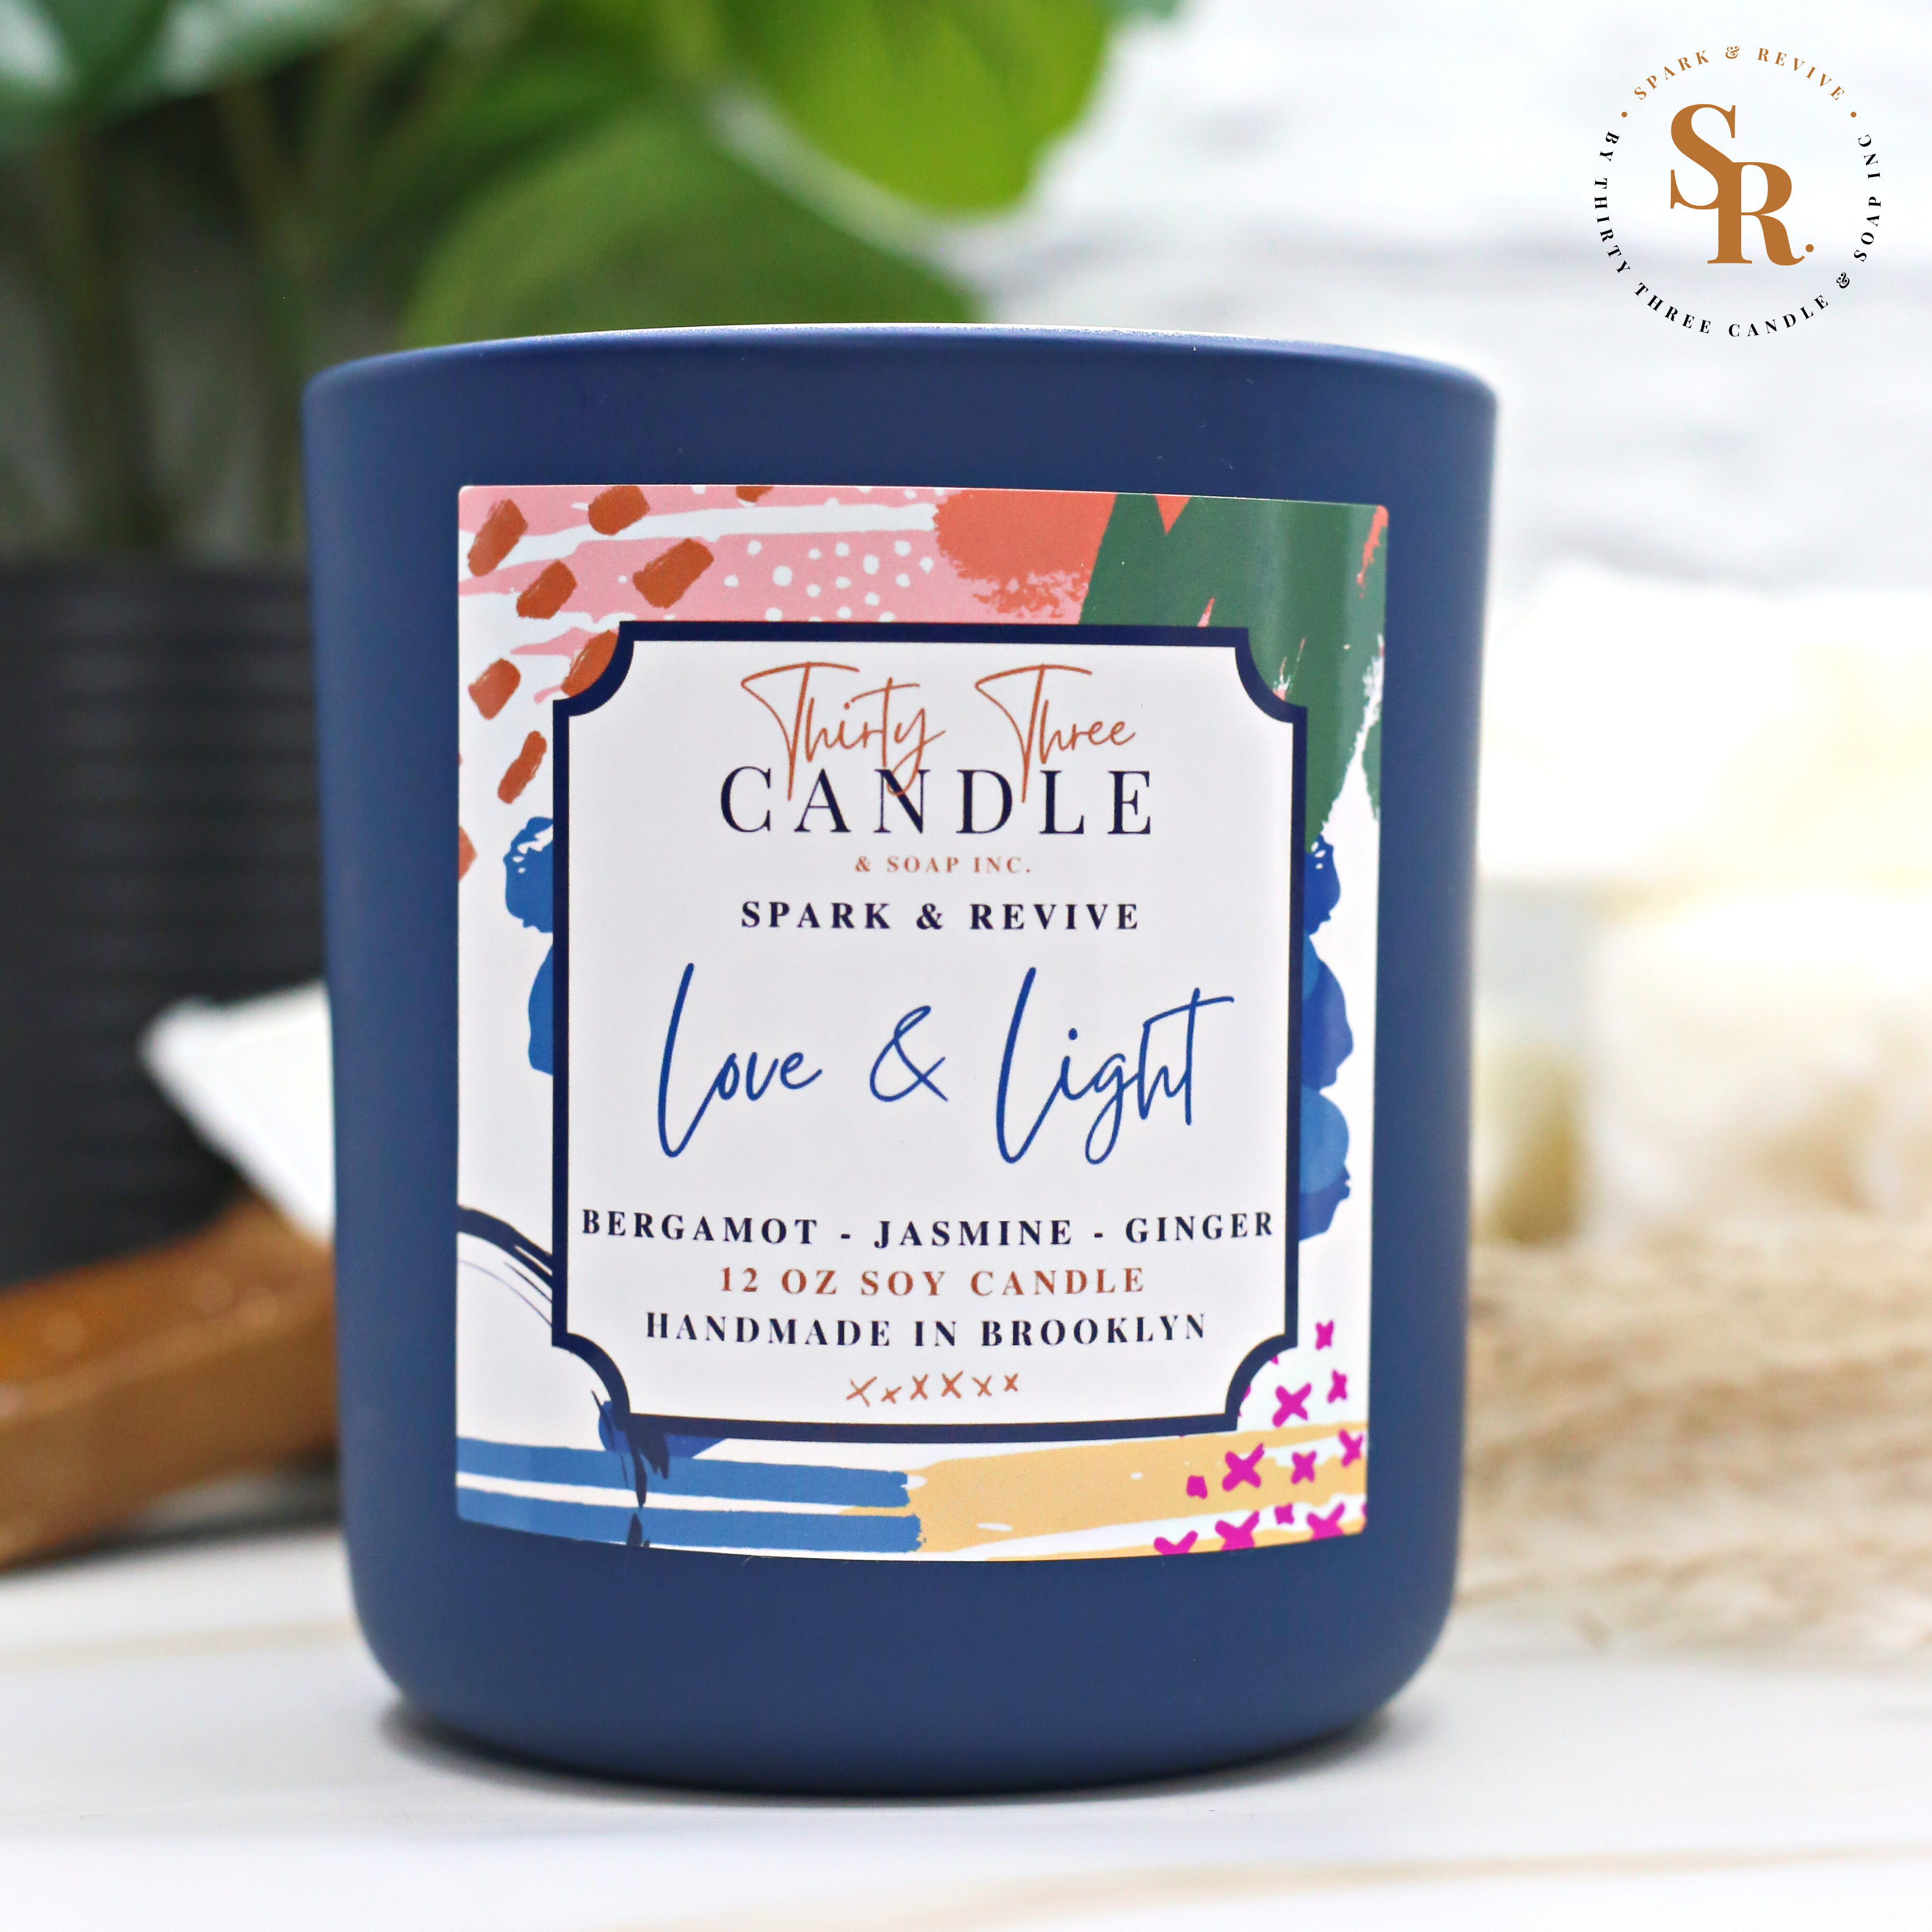 Uplift and transform your space with the soothing scent of our Love & Light scented soy candle. Bringing the ultimate spa experience to your space with an ethereal quality, Love & Light has fresh top notes of mandarin and lemongrass. Elevating this luxurious scent are mid notes of bergamot and ginger. These fragrances blend beautifully with delicate jasmine and white tea to calm your senses and shed the outside world. @SparkandRevive